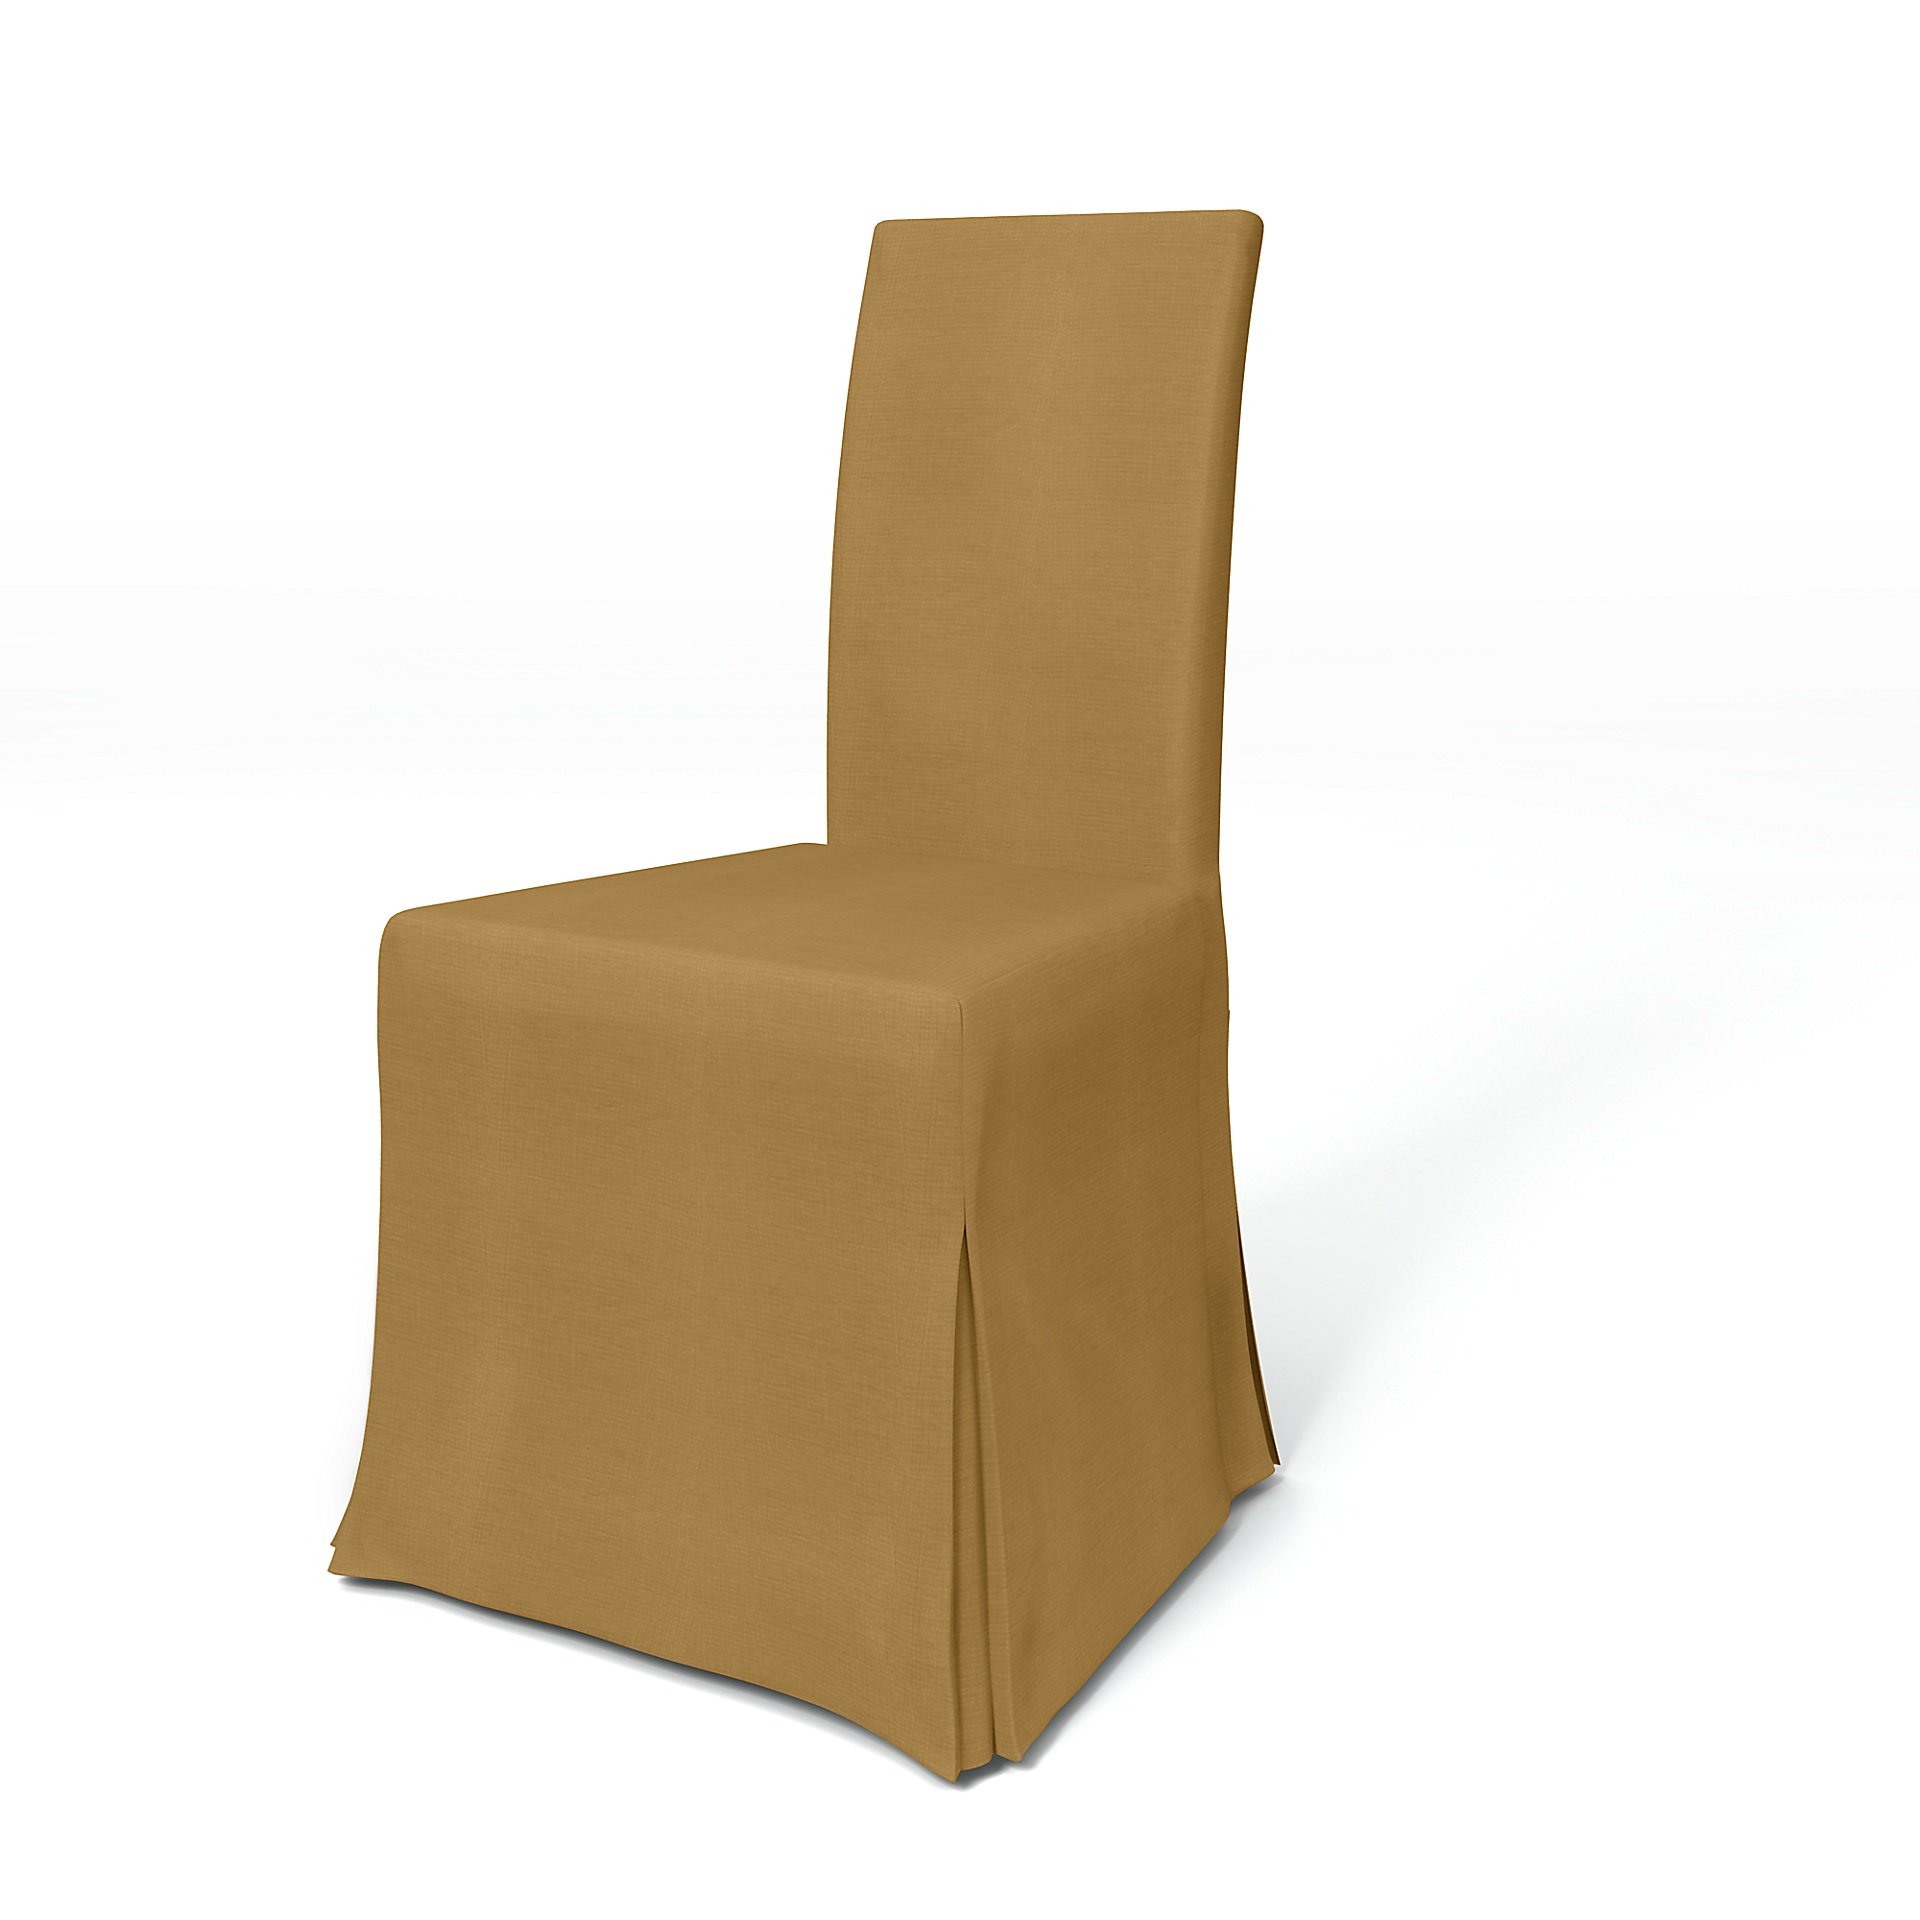 IKEA - Harry Dining Chair Cover, Dusty Yellow, Linen - Bemz